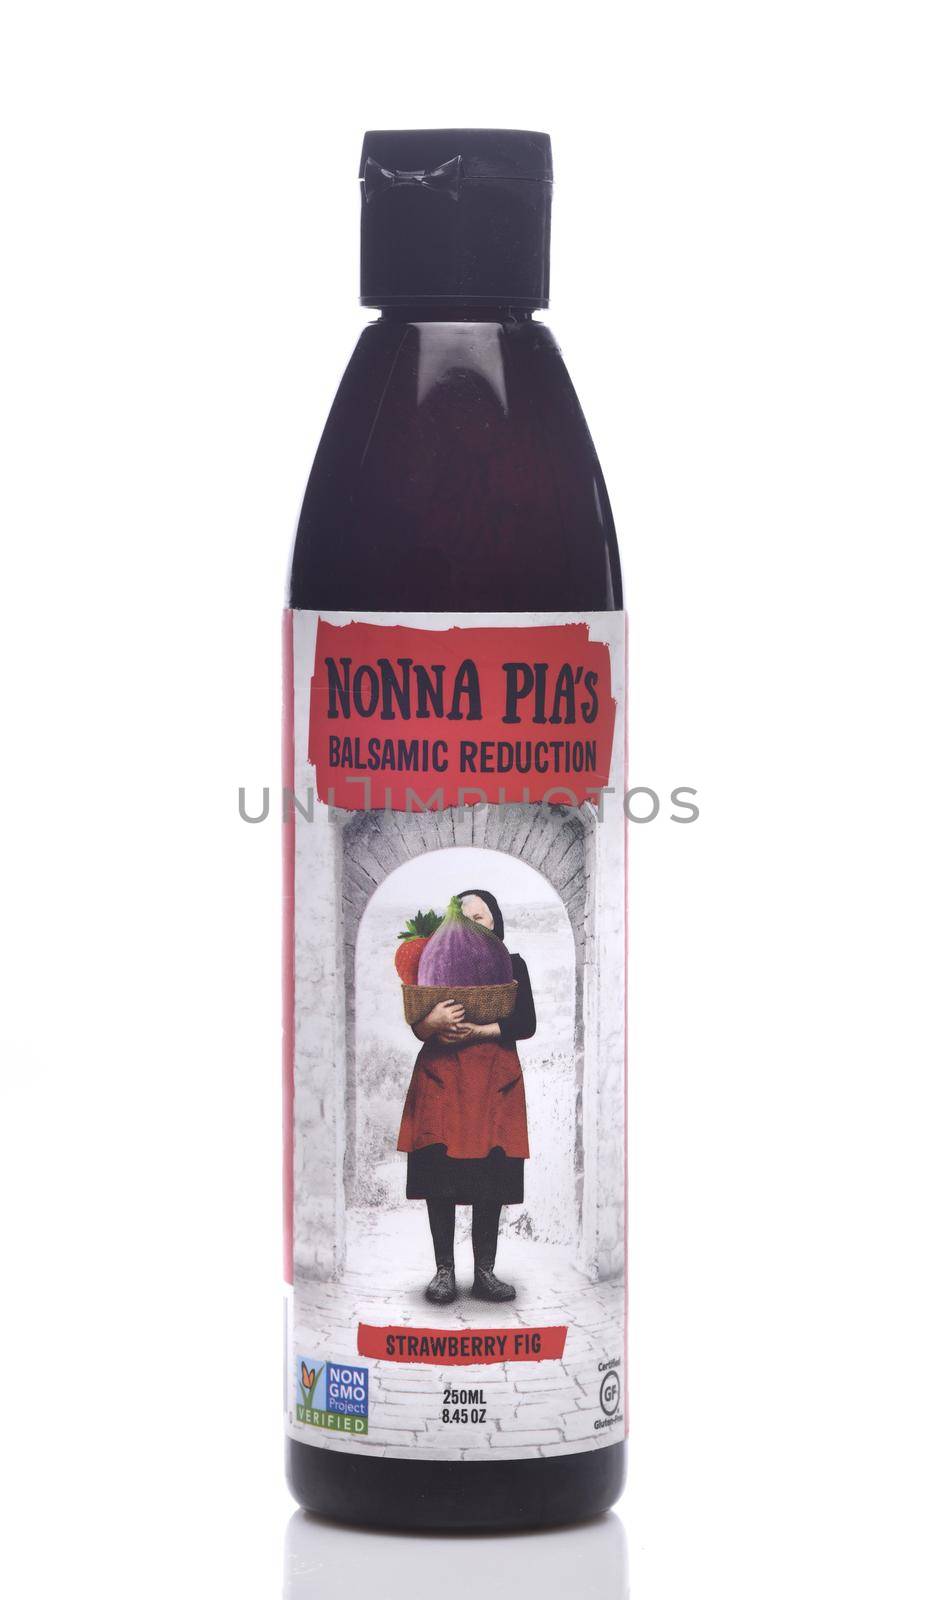 IRVINE, CALIFORNIA - MAY 23, 2018: A bottle of Nonna Pias Strawberry Fig Balsamic Reduction. Nonna Pias is based in Whistler, British Columbia.